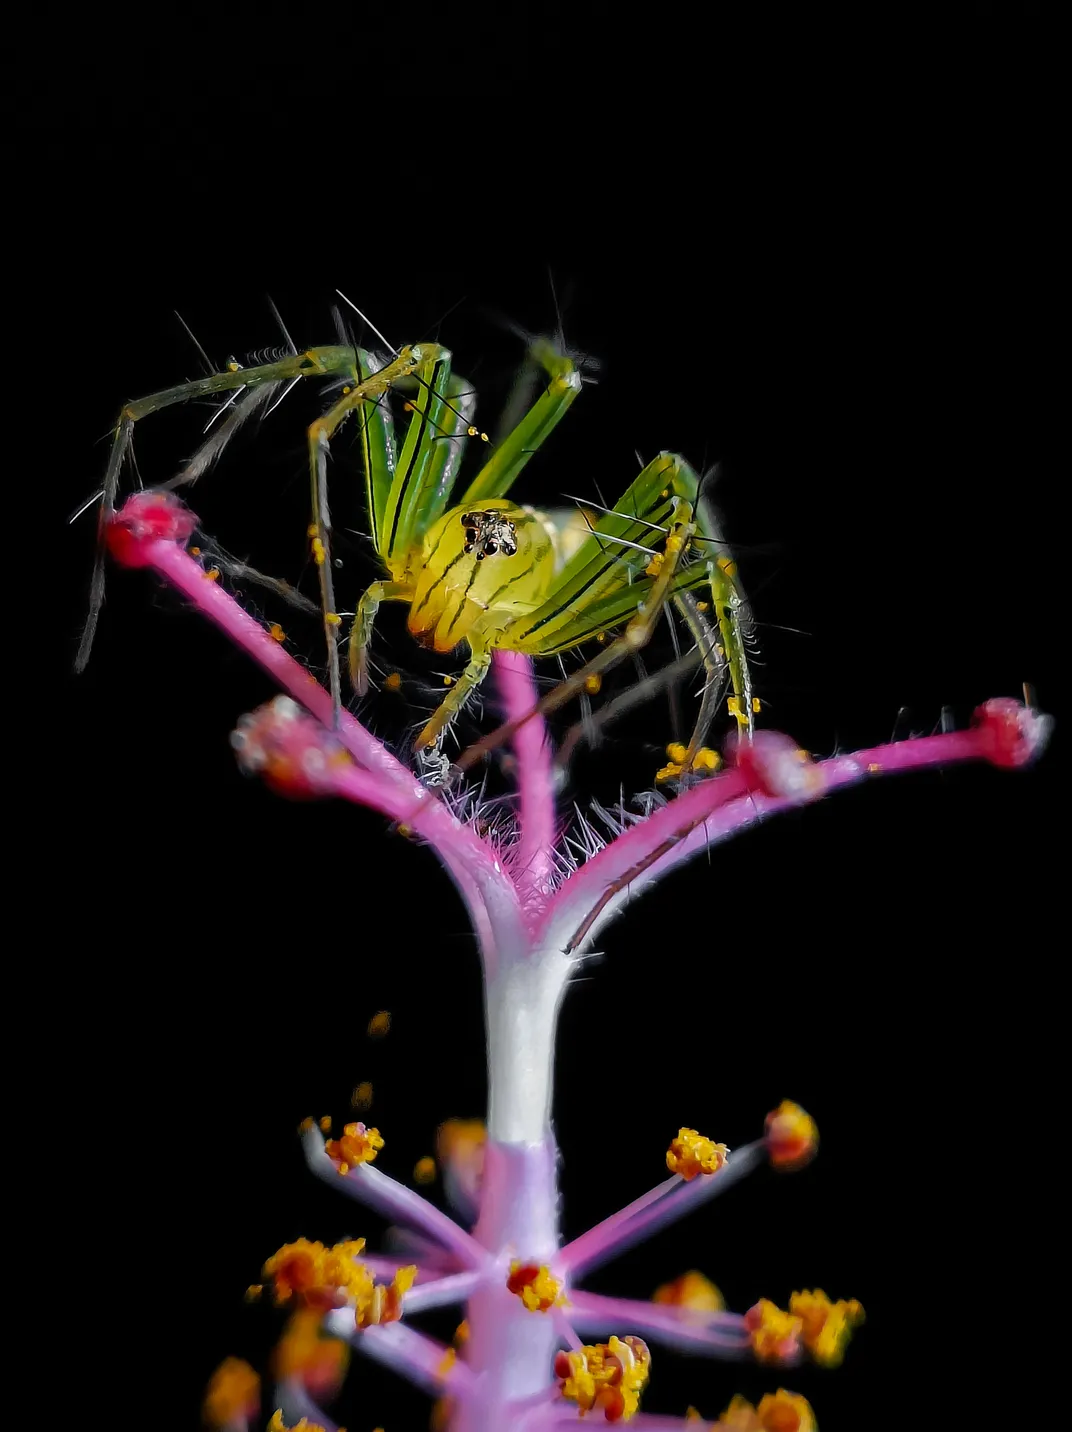 4 - A striped lynx spider assists in the pollination process of a hibiscus flower.